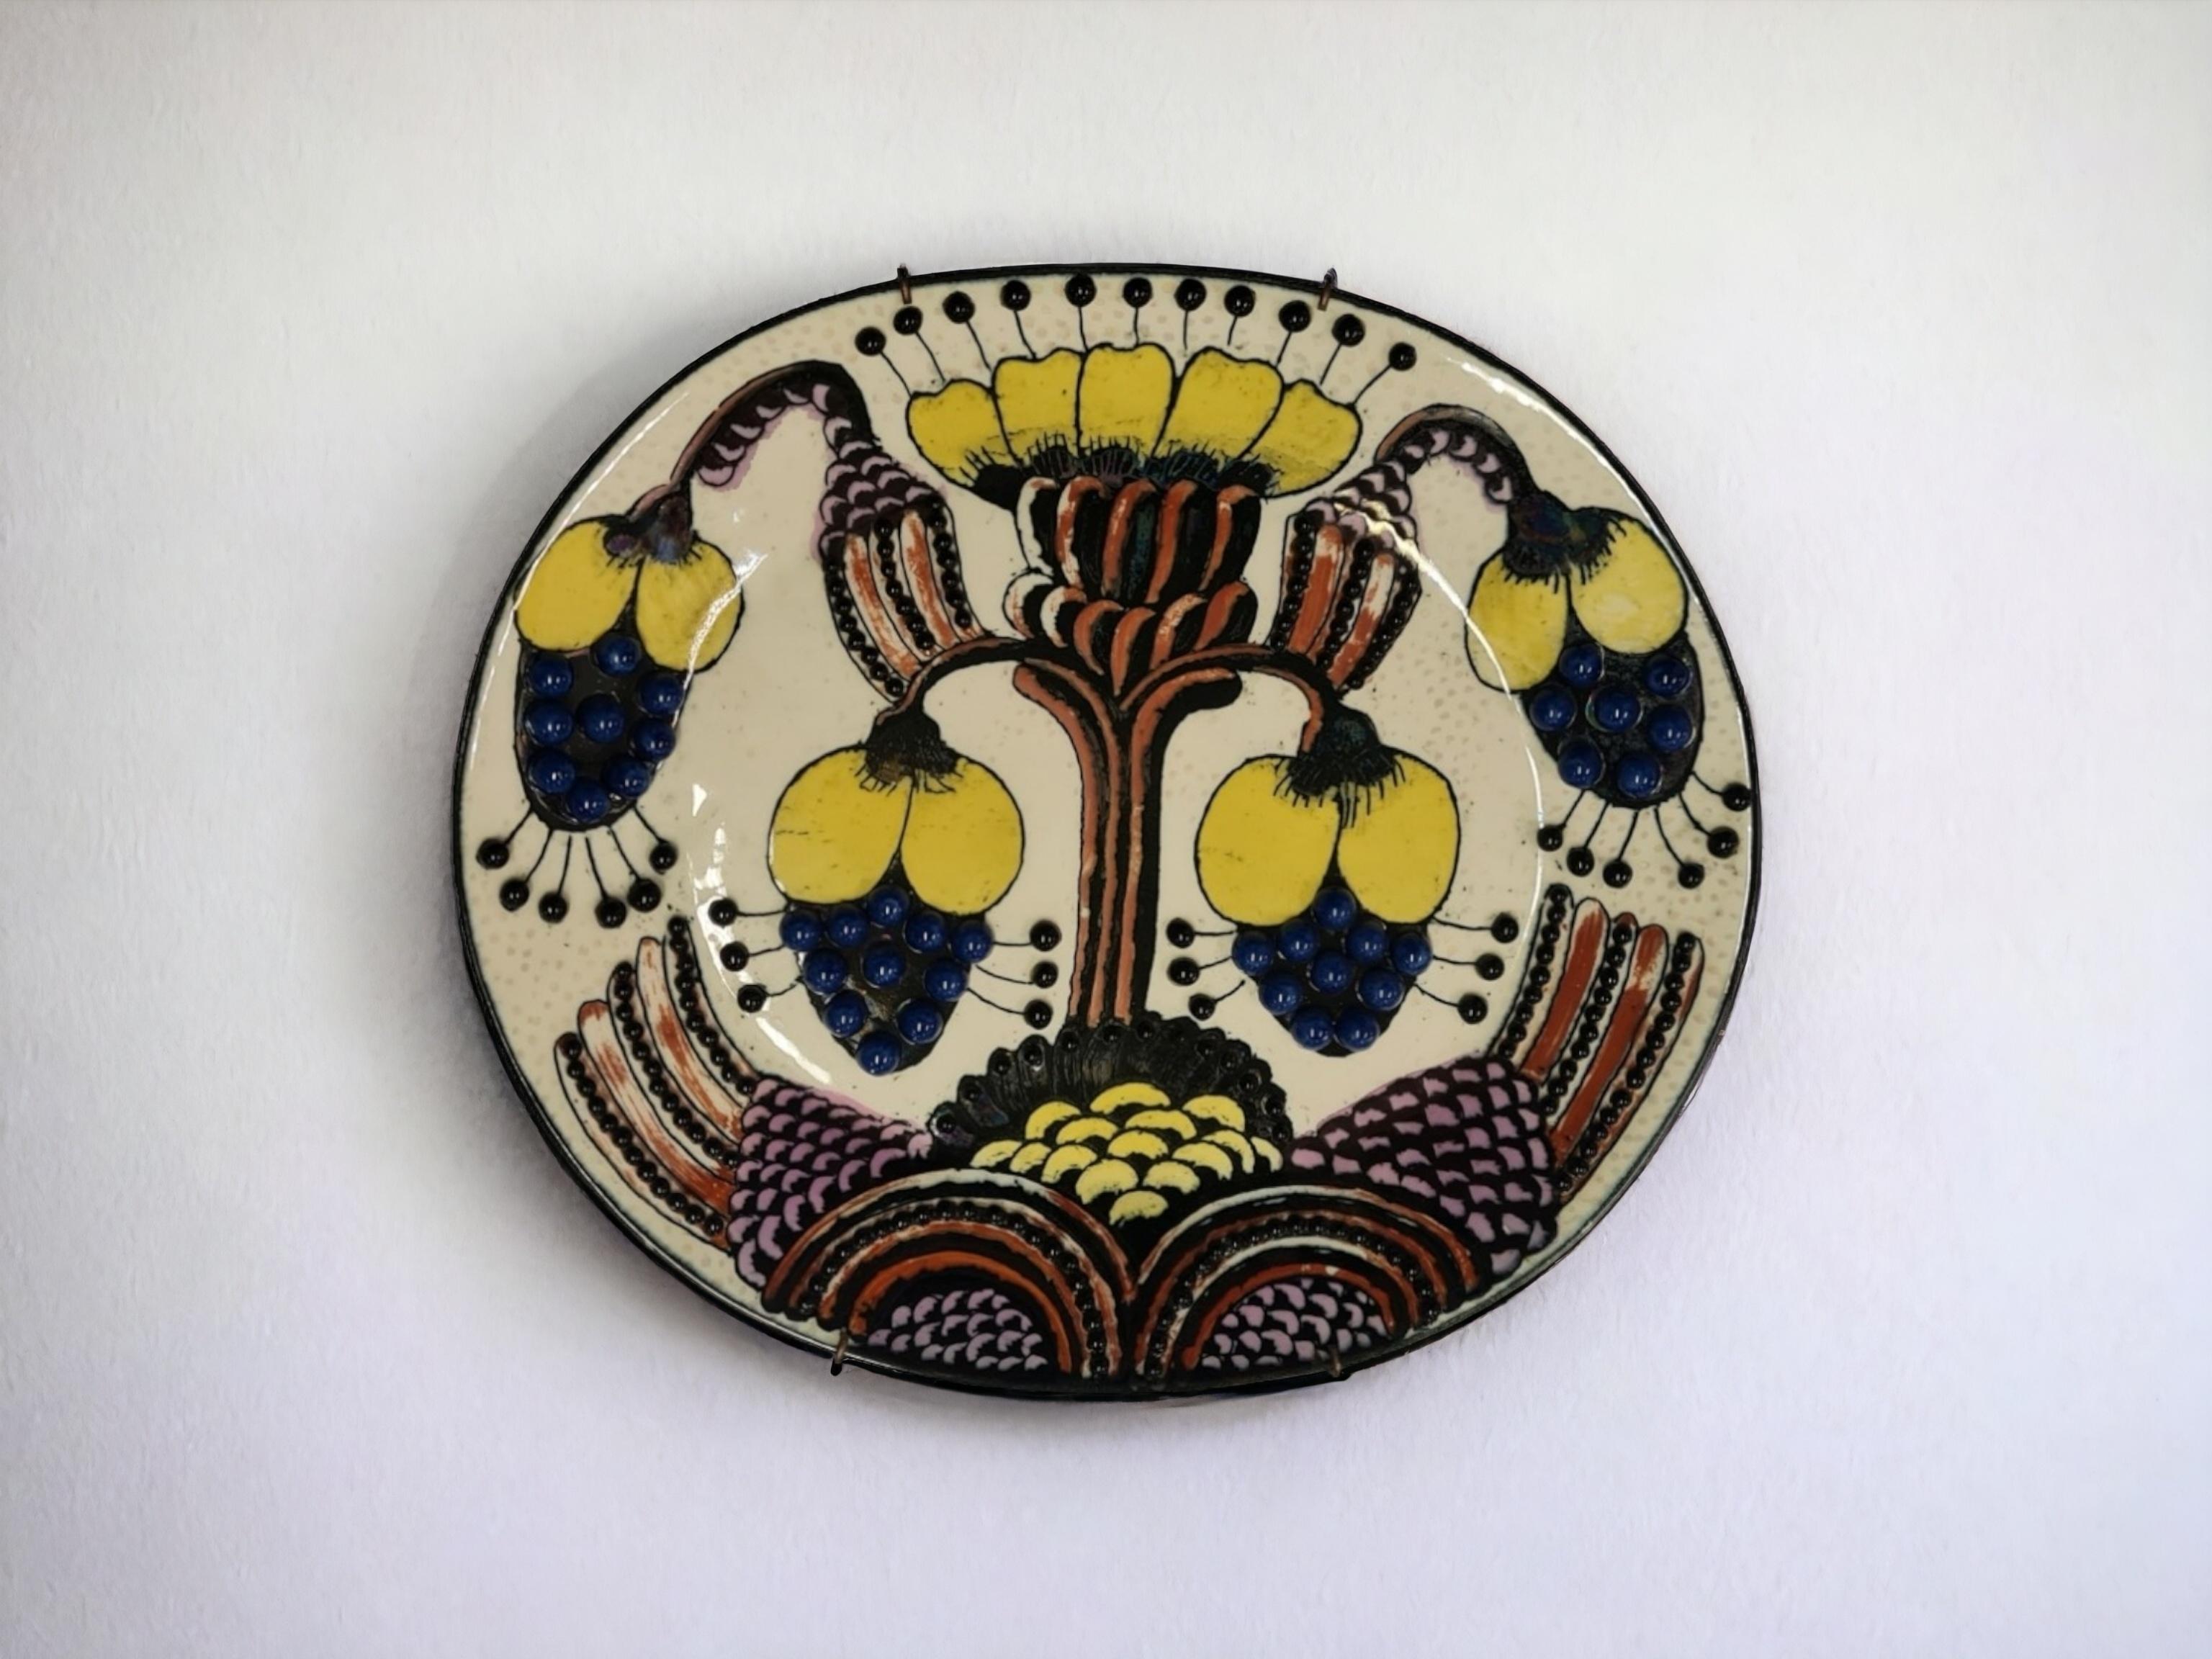 Birger Kaipiainen (1915-1988) was the master of decorative ceramics. He was especially known for his ornamental dishes, rich, colourful and with themes from the fantasy world and fairytales, which fought against idealism of minimalism in 1950s.